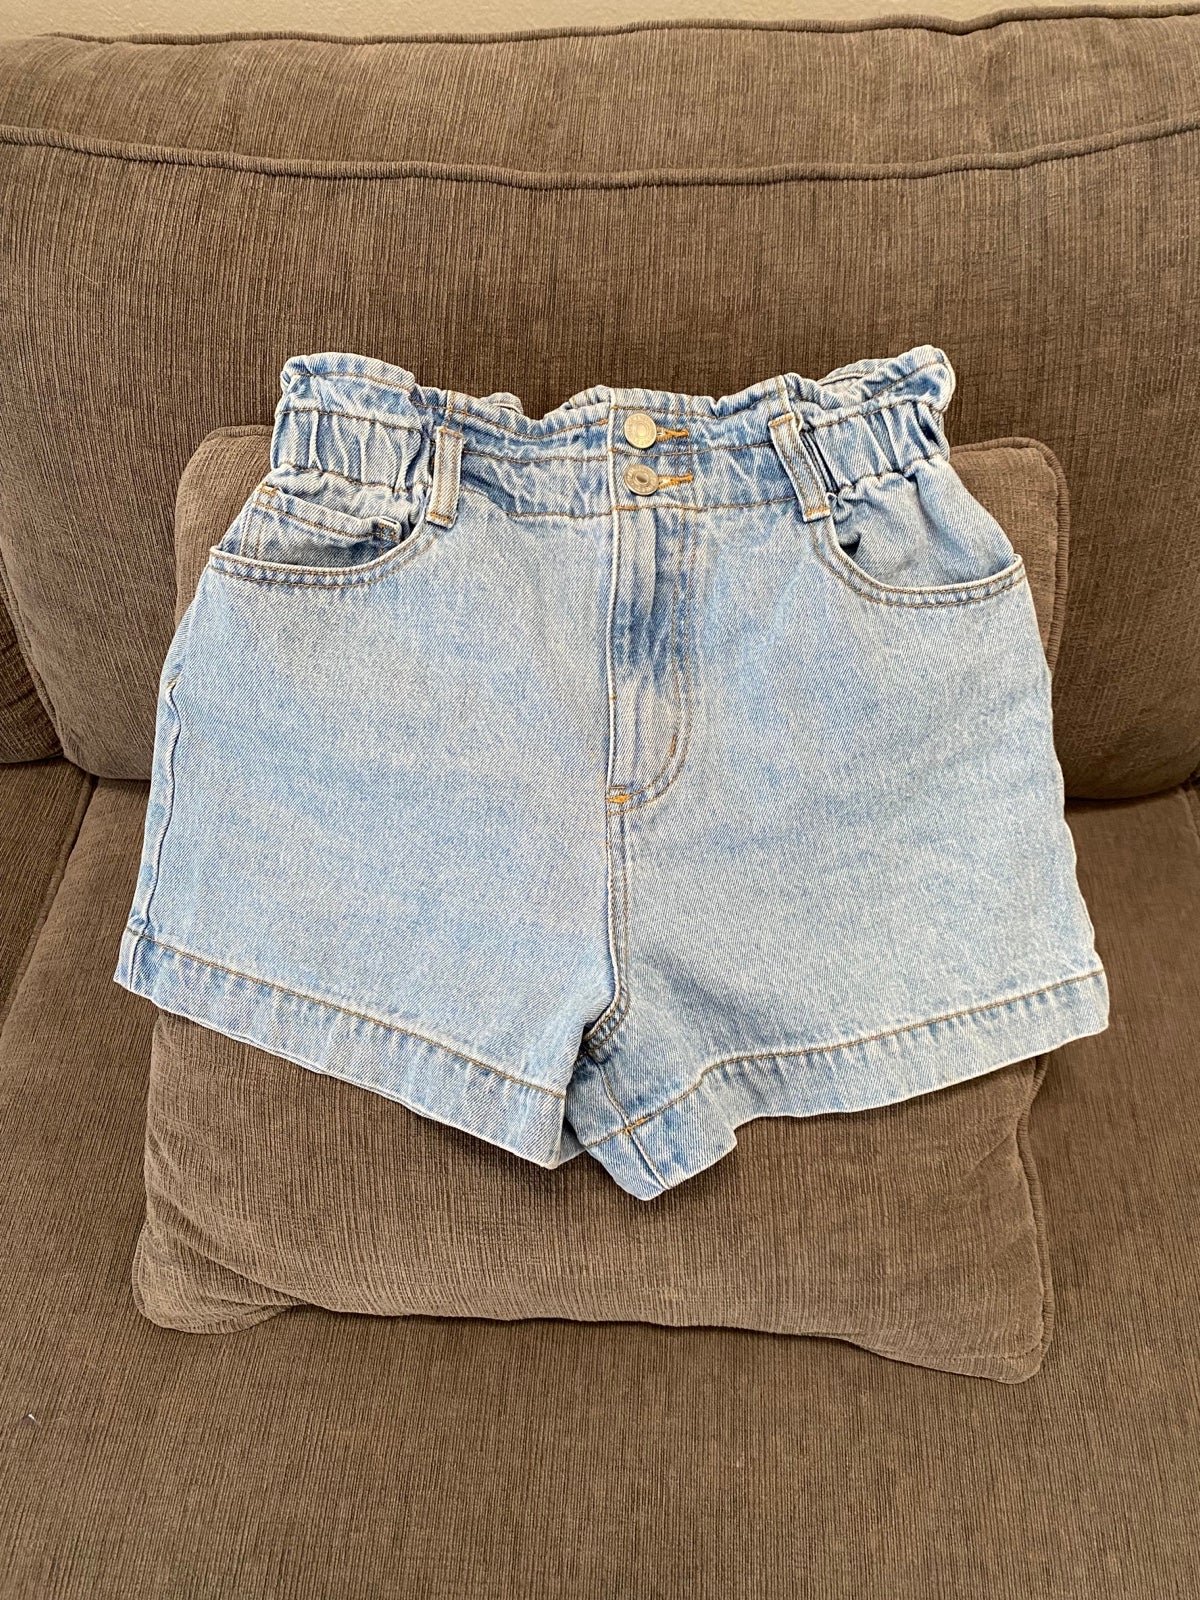 Great Jean short high waisted nWduTBgsN Everyday Low Pr